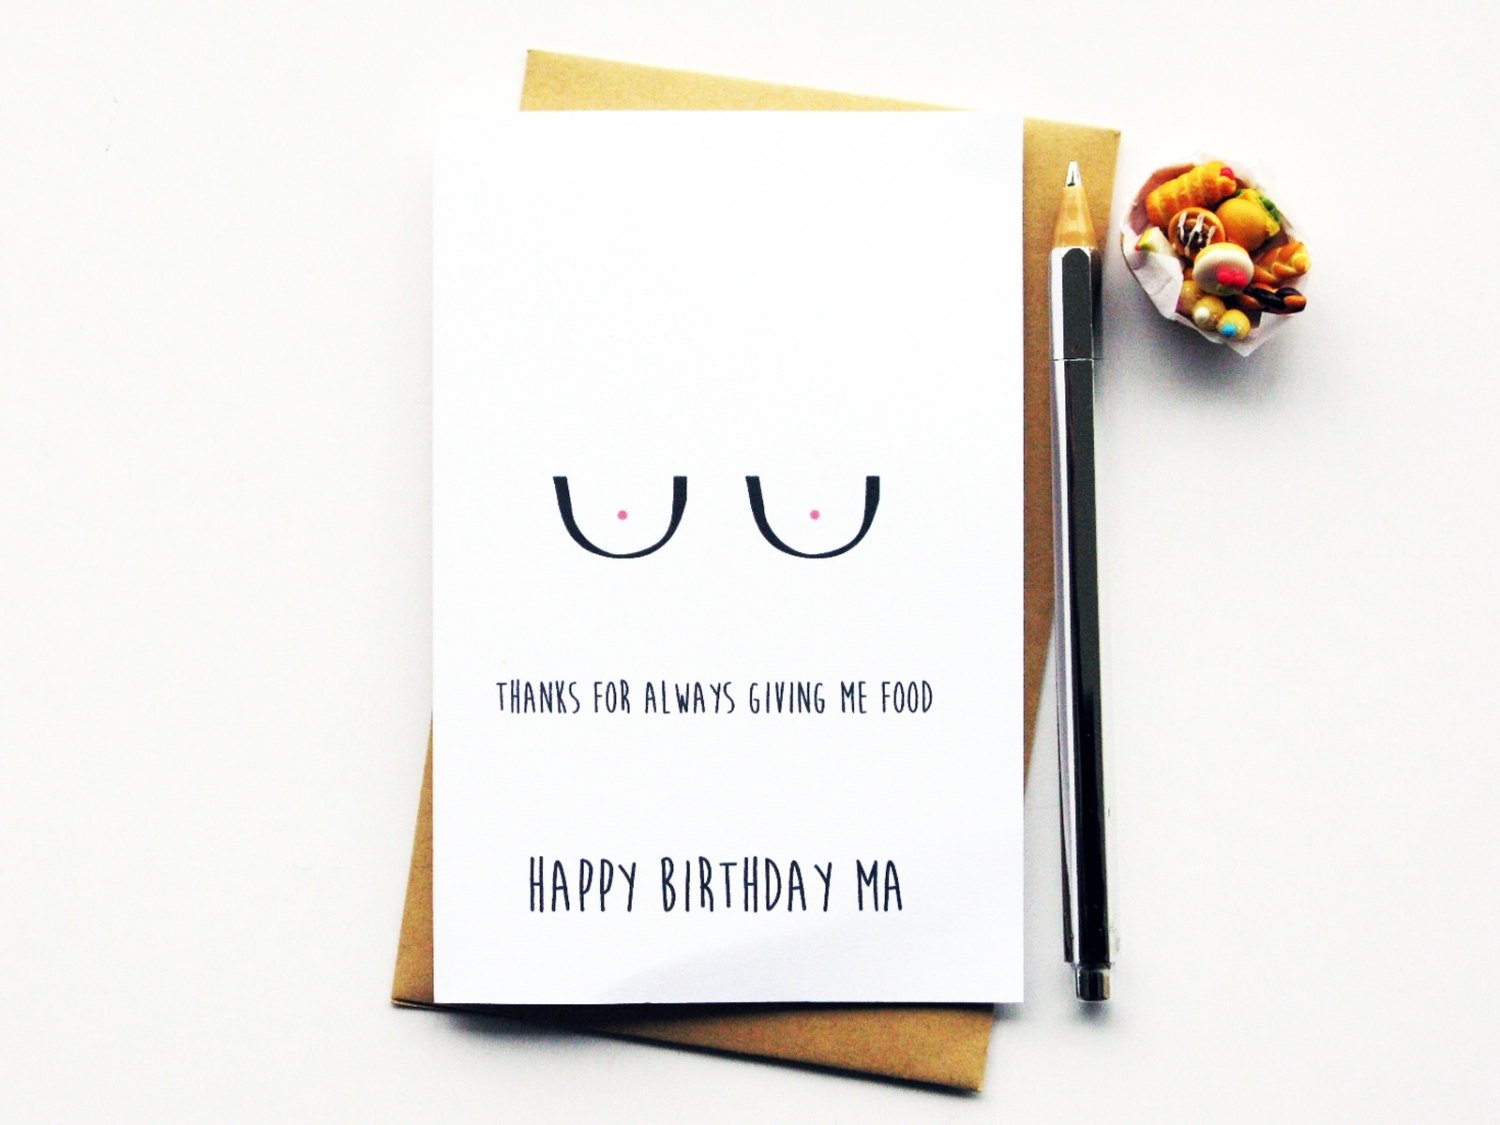 Funny Homemade Birthday Cards For Friends